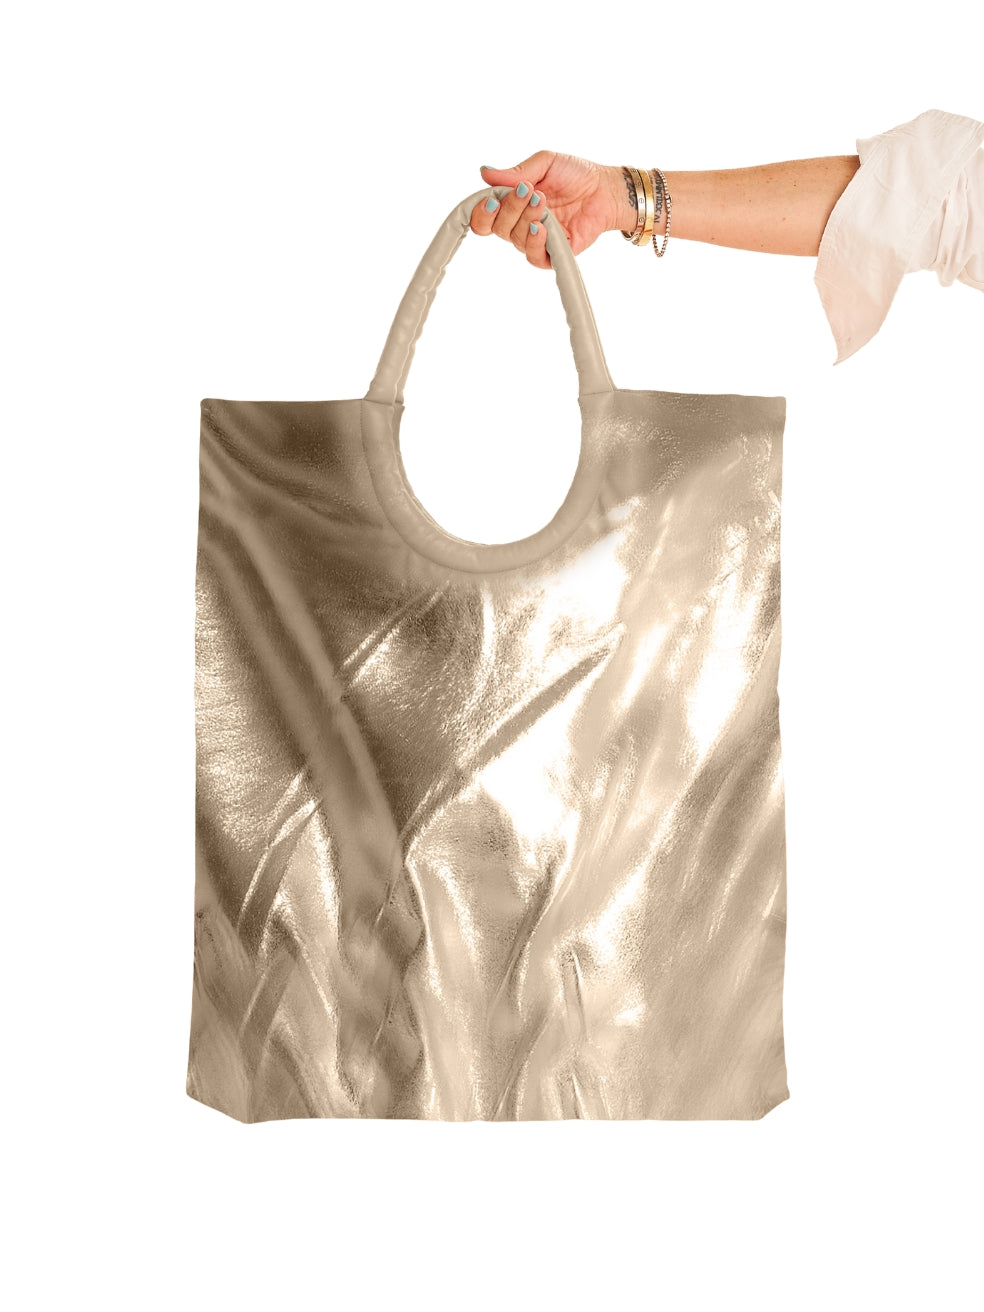 24 Hour Tote Foil Large Oversized Everyday Bag Made in Canada Vegan Leather